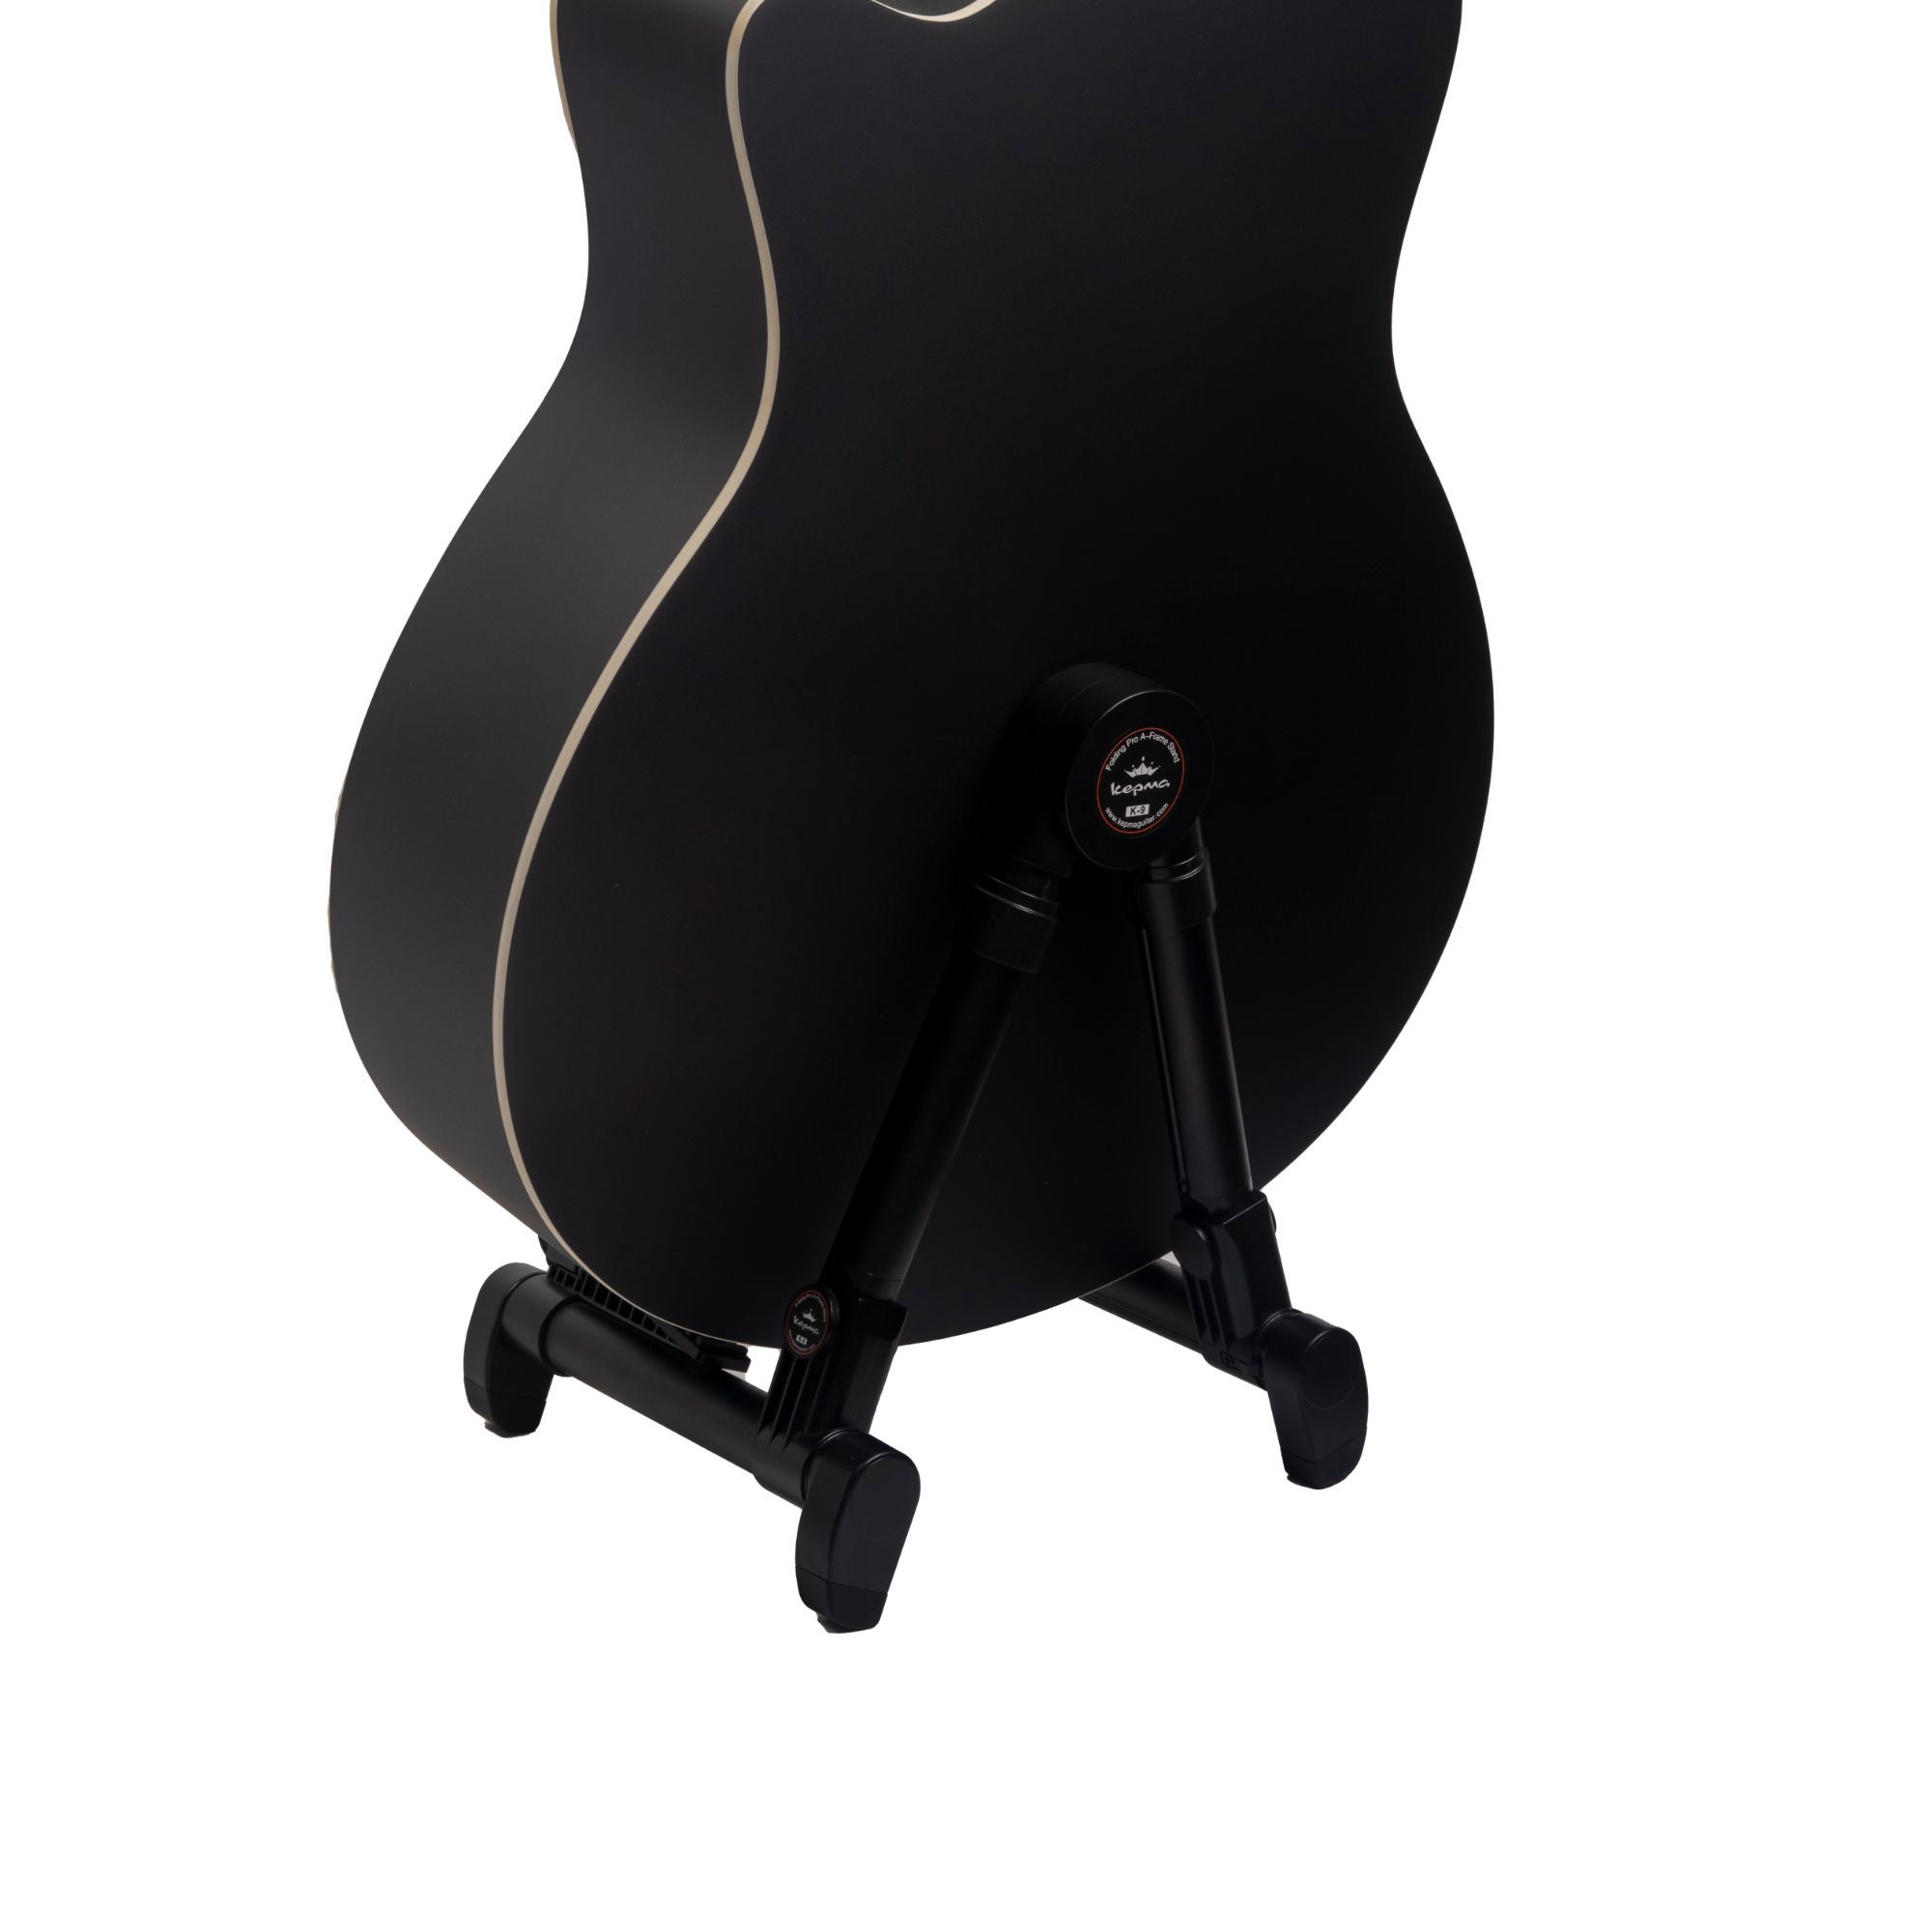 Kepma Portable Guitar Stand Online price in India